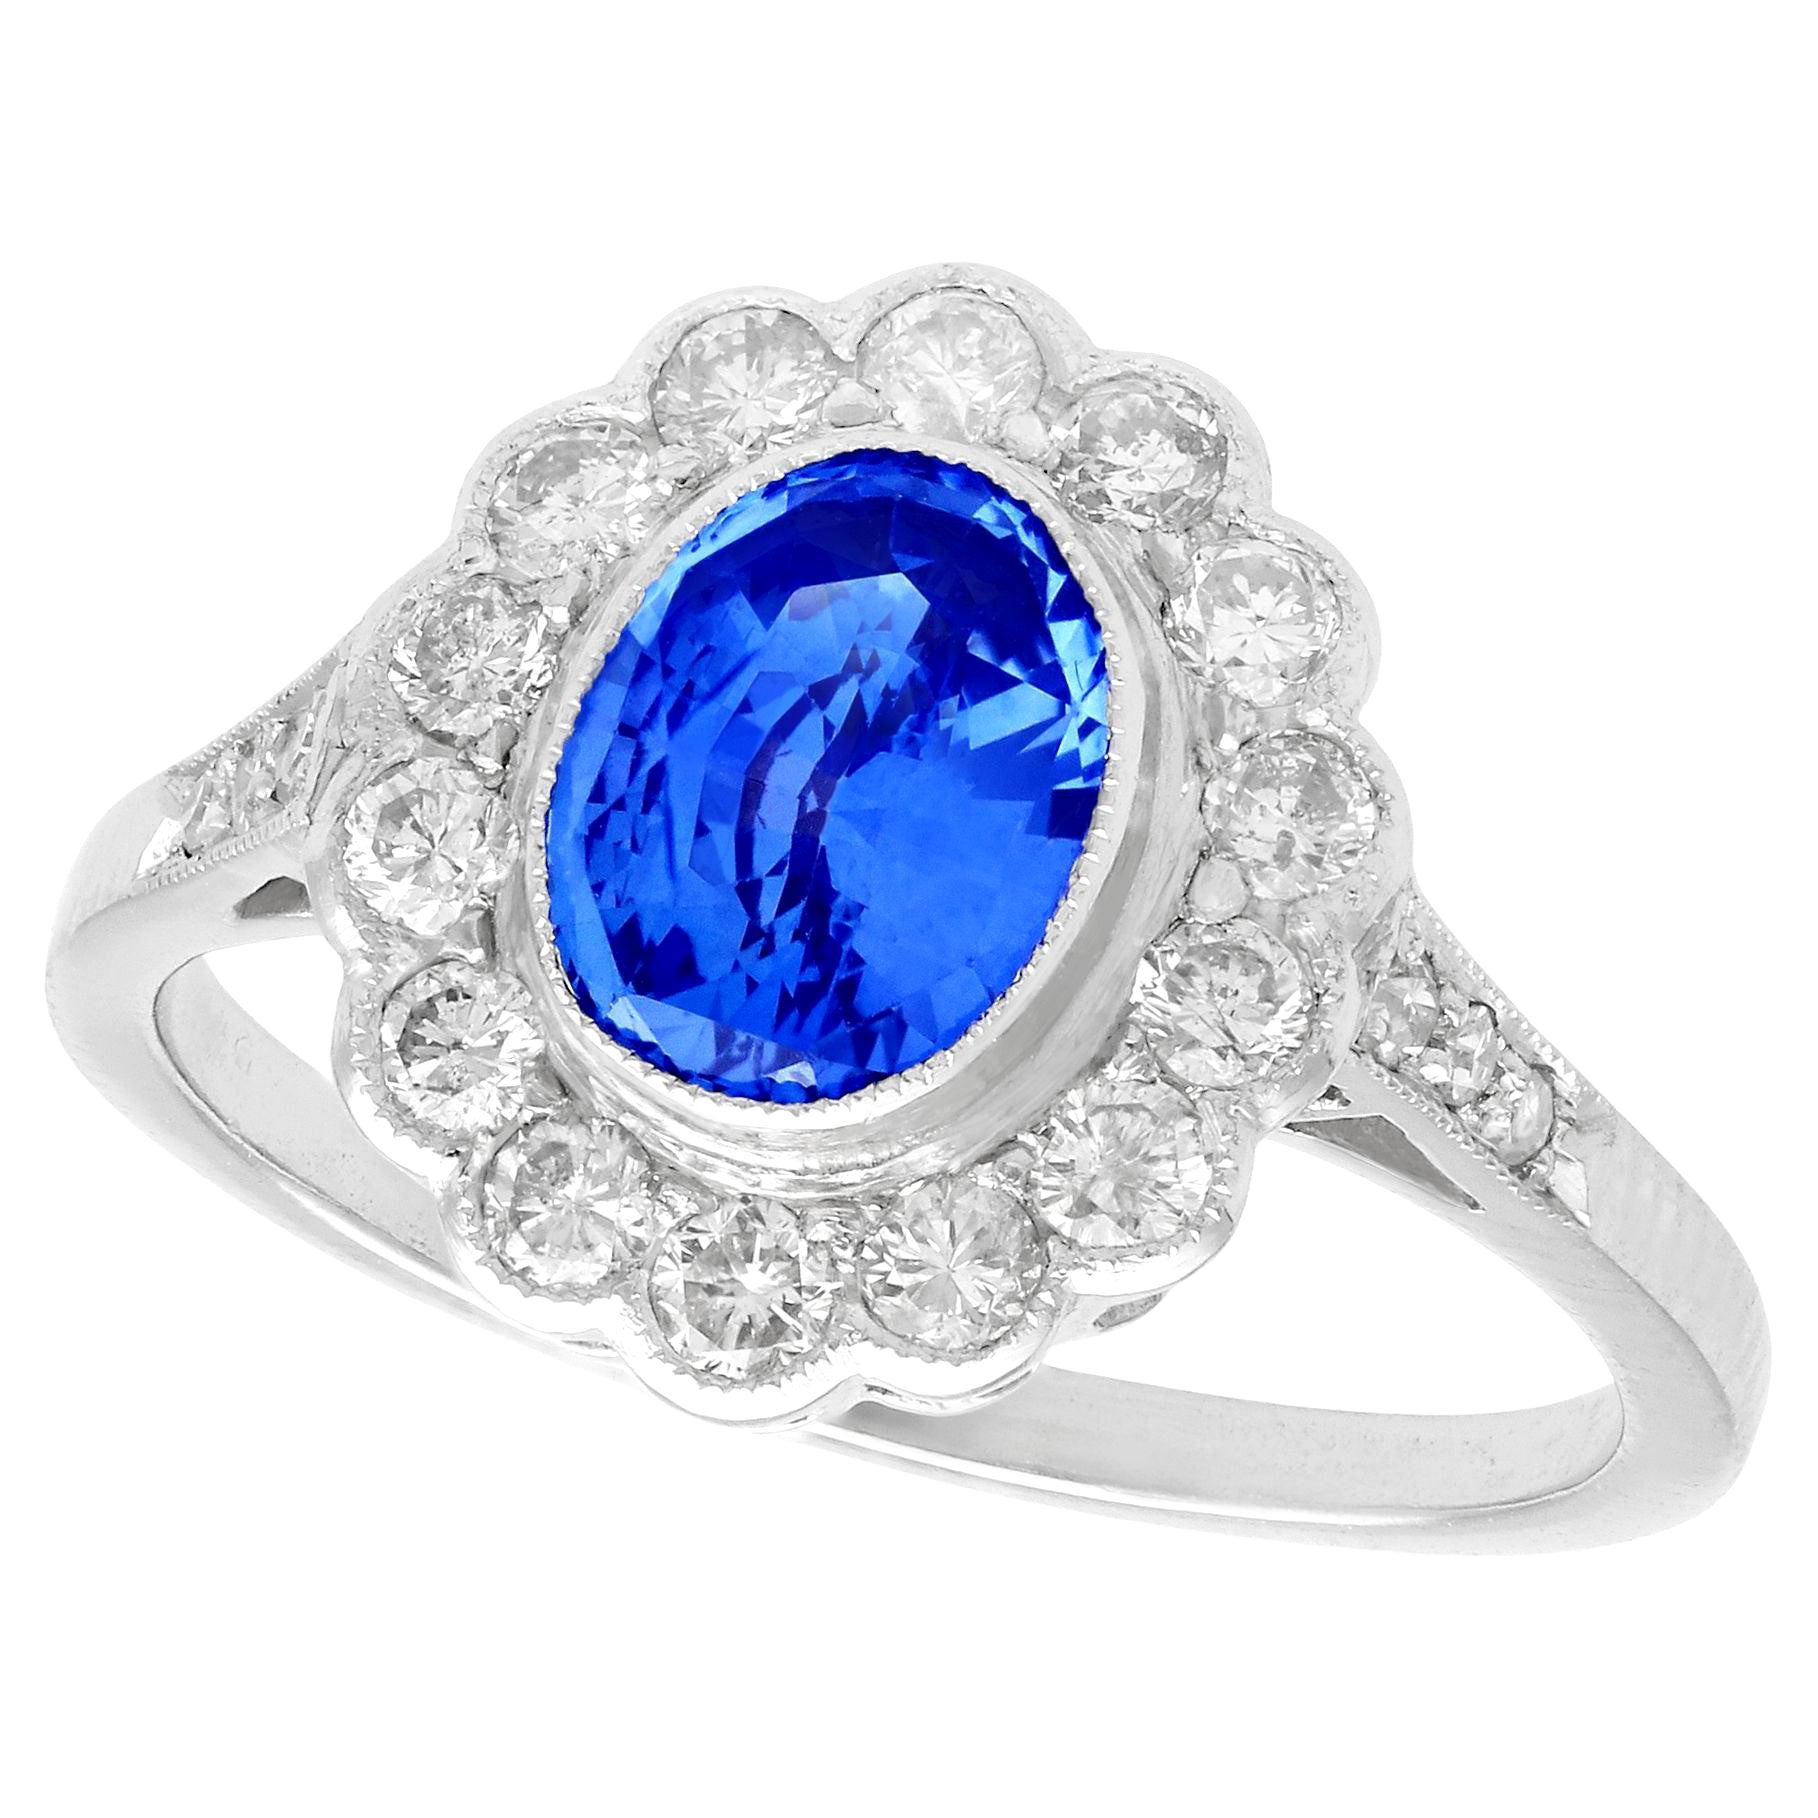 1960s 1.29 Carat Sapphire and Diamond Platinum Cocktail Ring For Sale